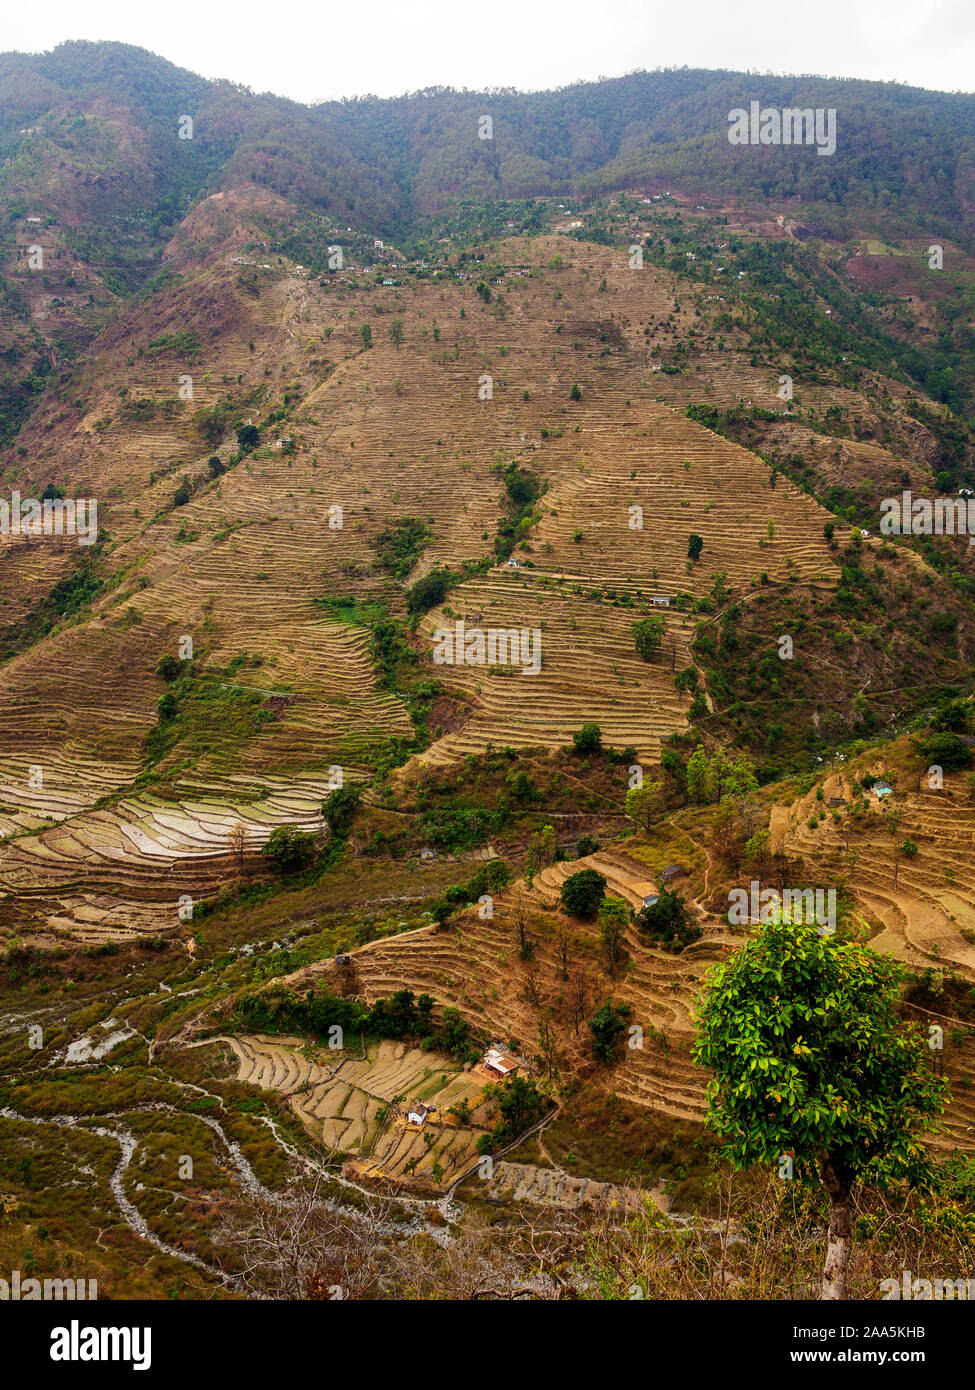 Extensive terraced fields at the remote village of Dalkanya on the Nandhour Valley, Kumaon Hills, Uttarakhand, India Stock Photo